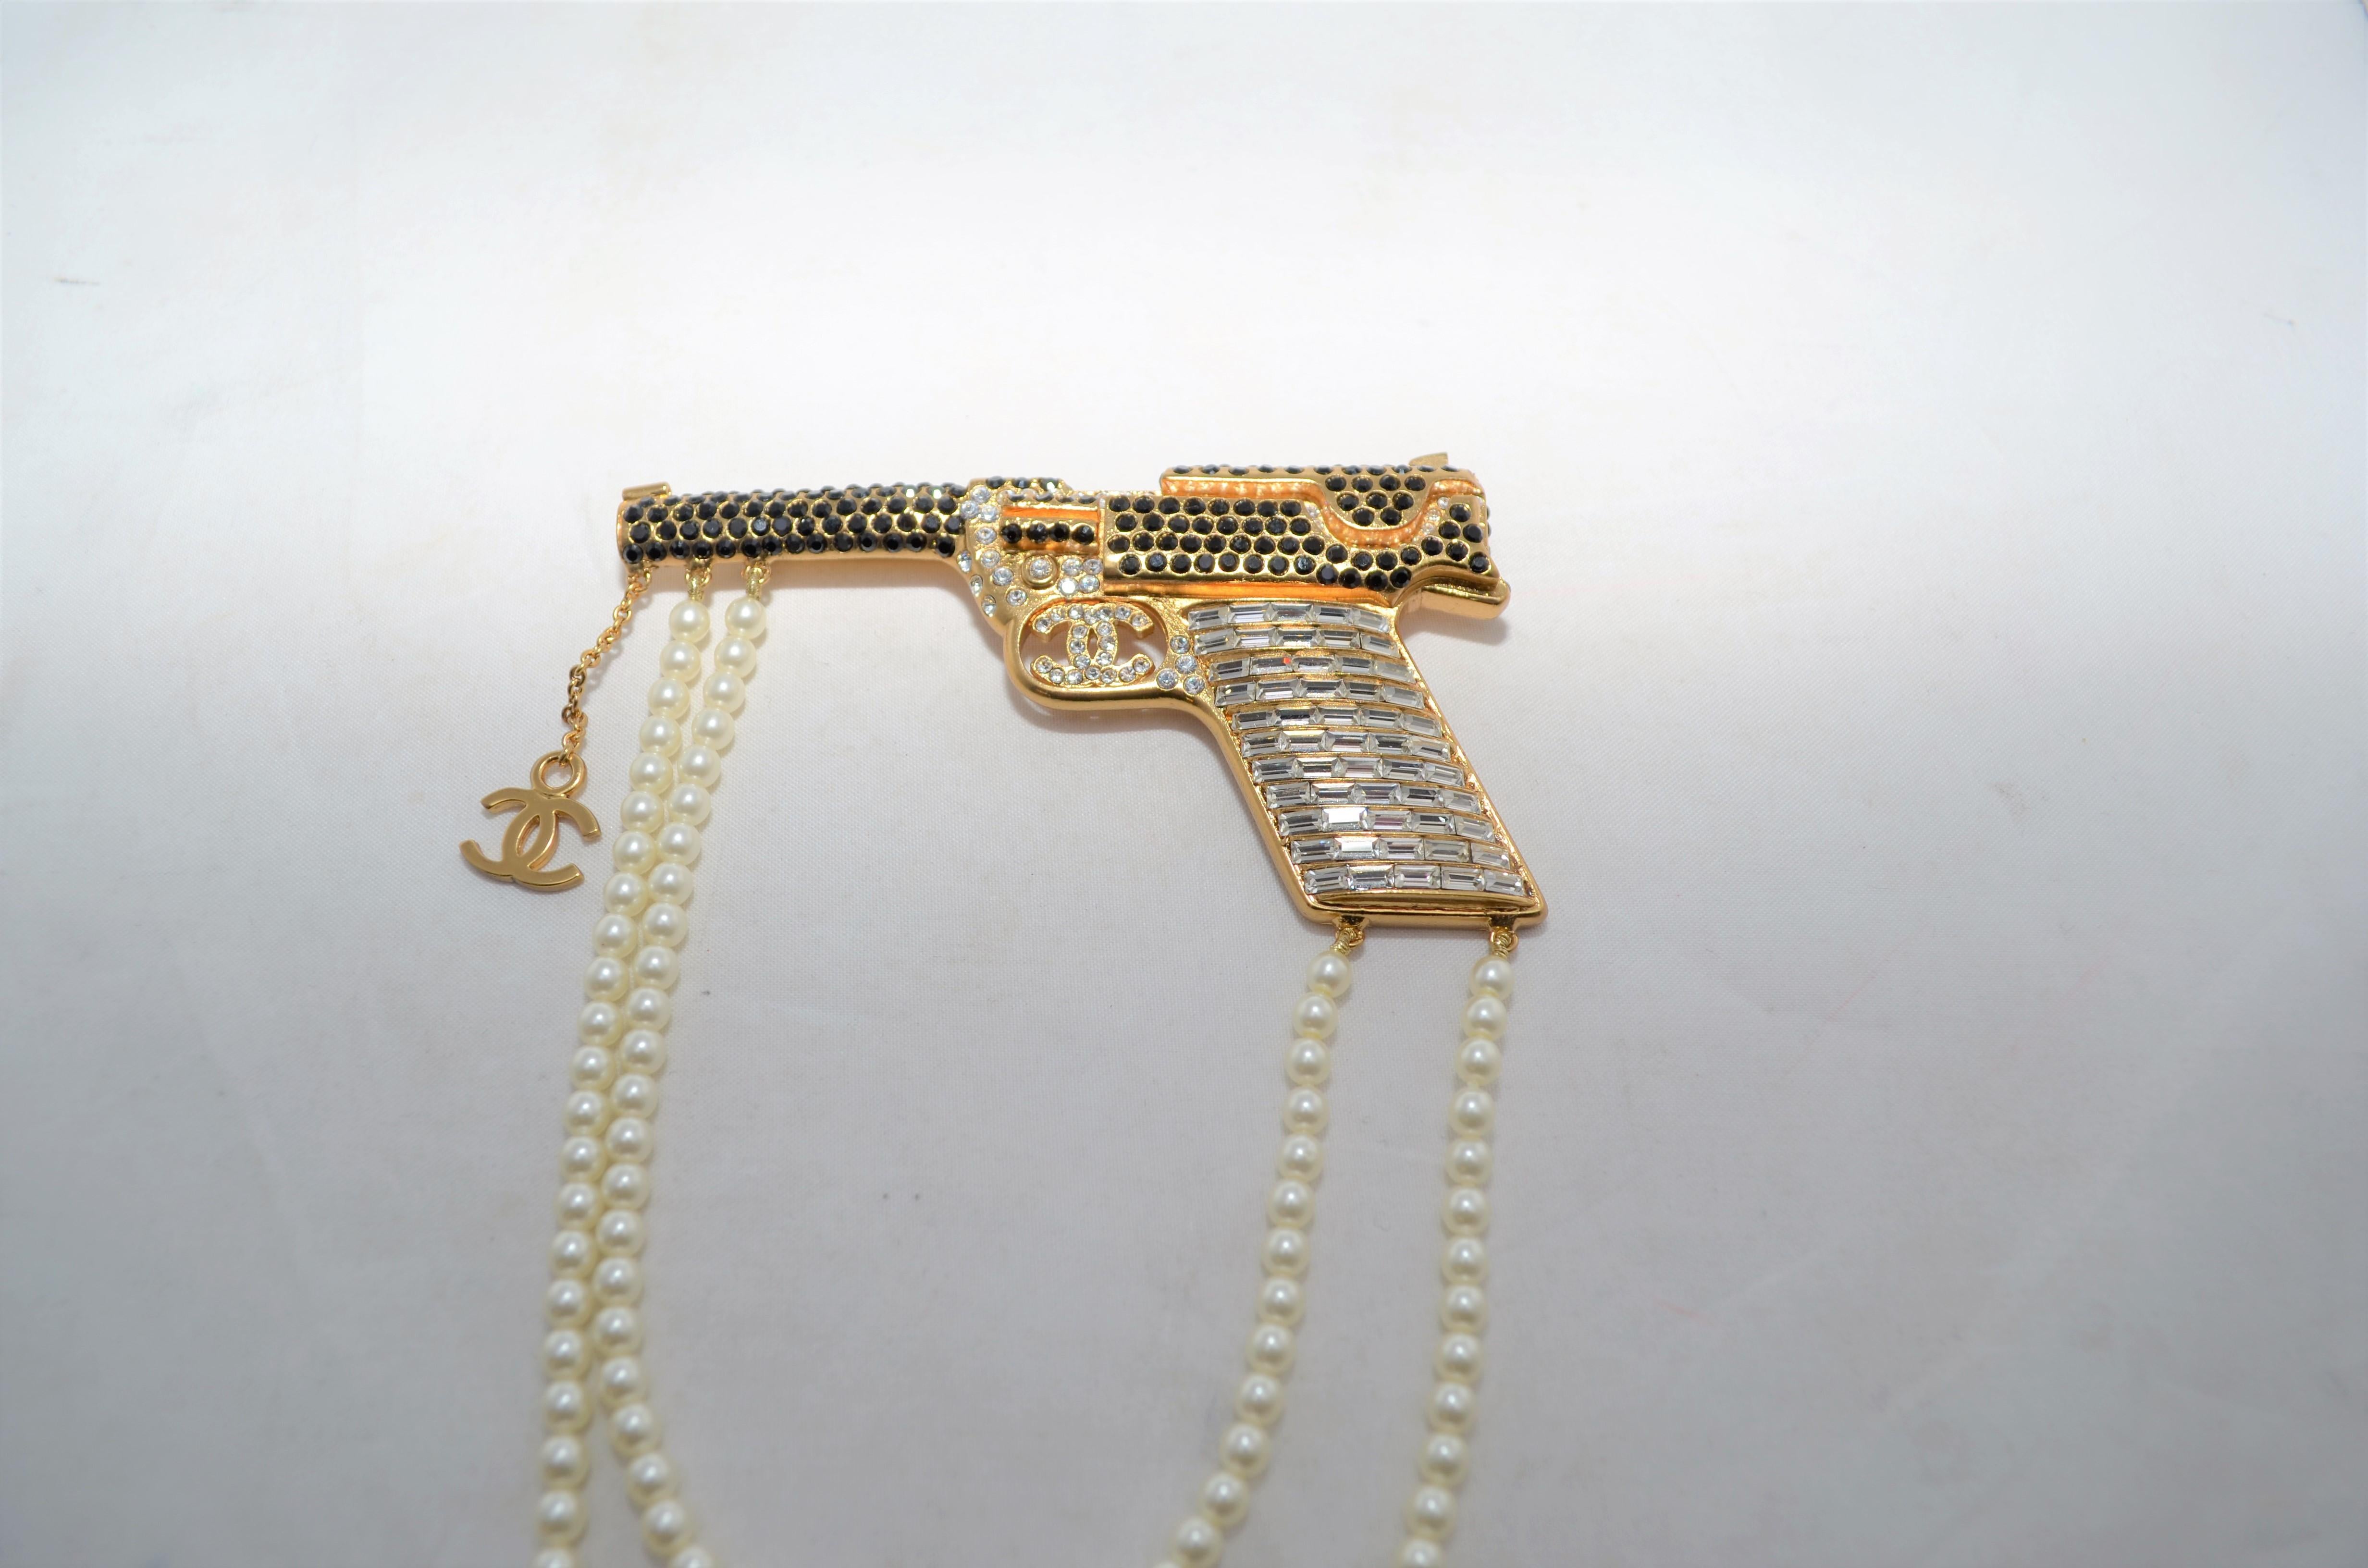 Baguette Cut 2001 A Chanel Gun Brooch Pin with Rhinestones and Pearls